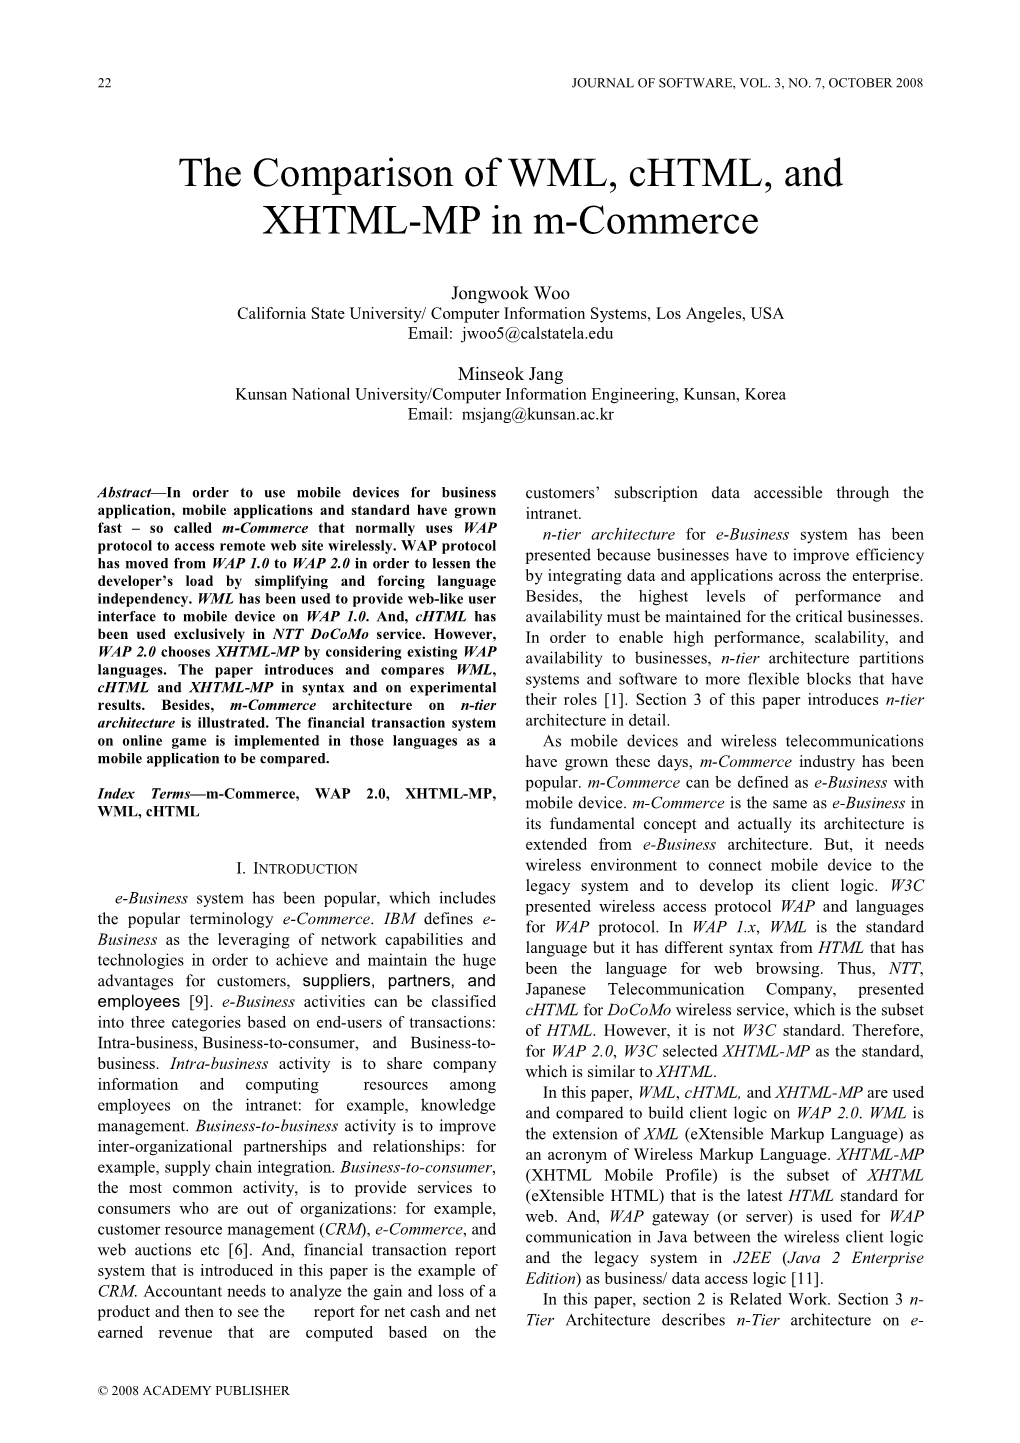 The Comparison of WML, Chtml, and XHTML-MP in M-Commerce